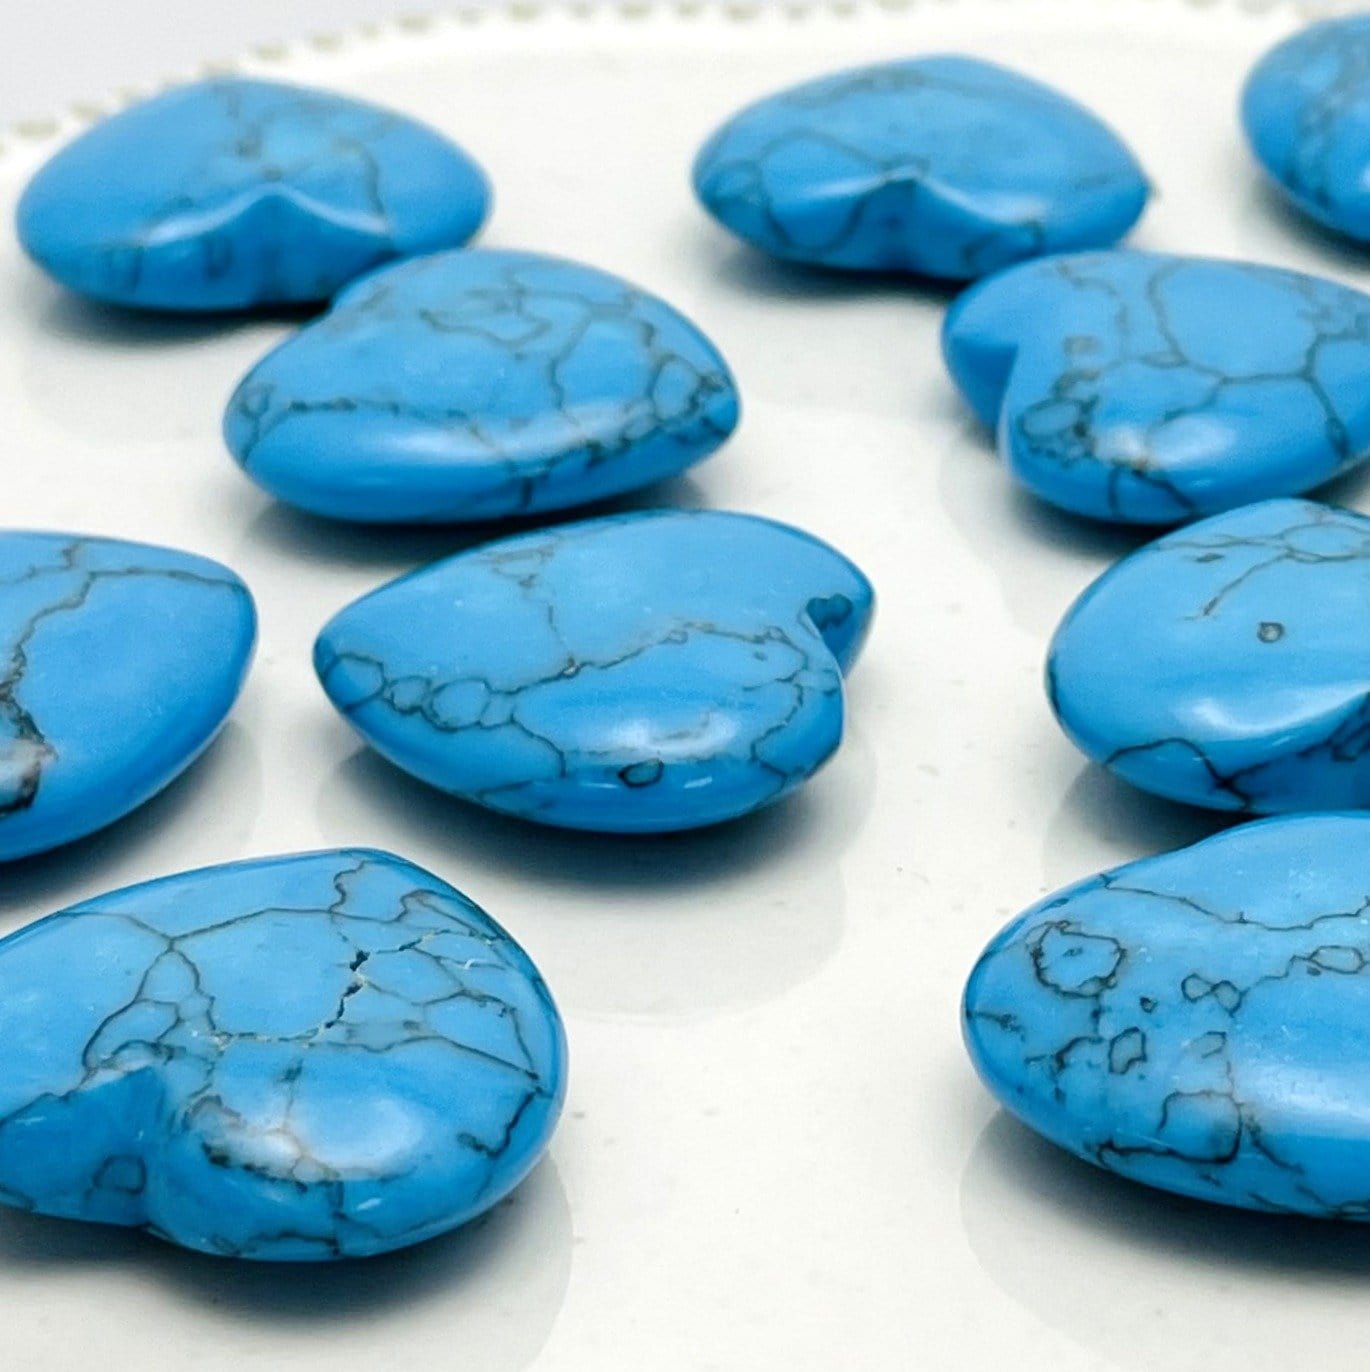 Turquoise Howlite Hearts from the side showing thickness